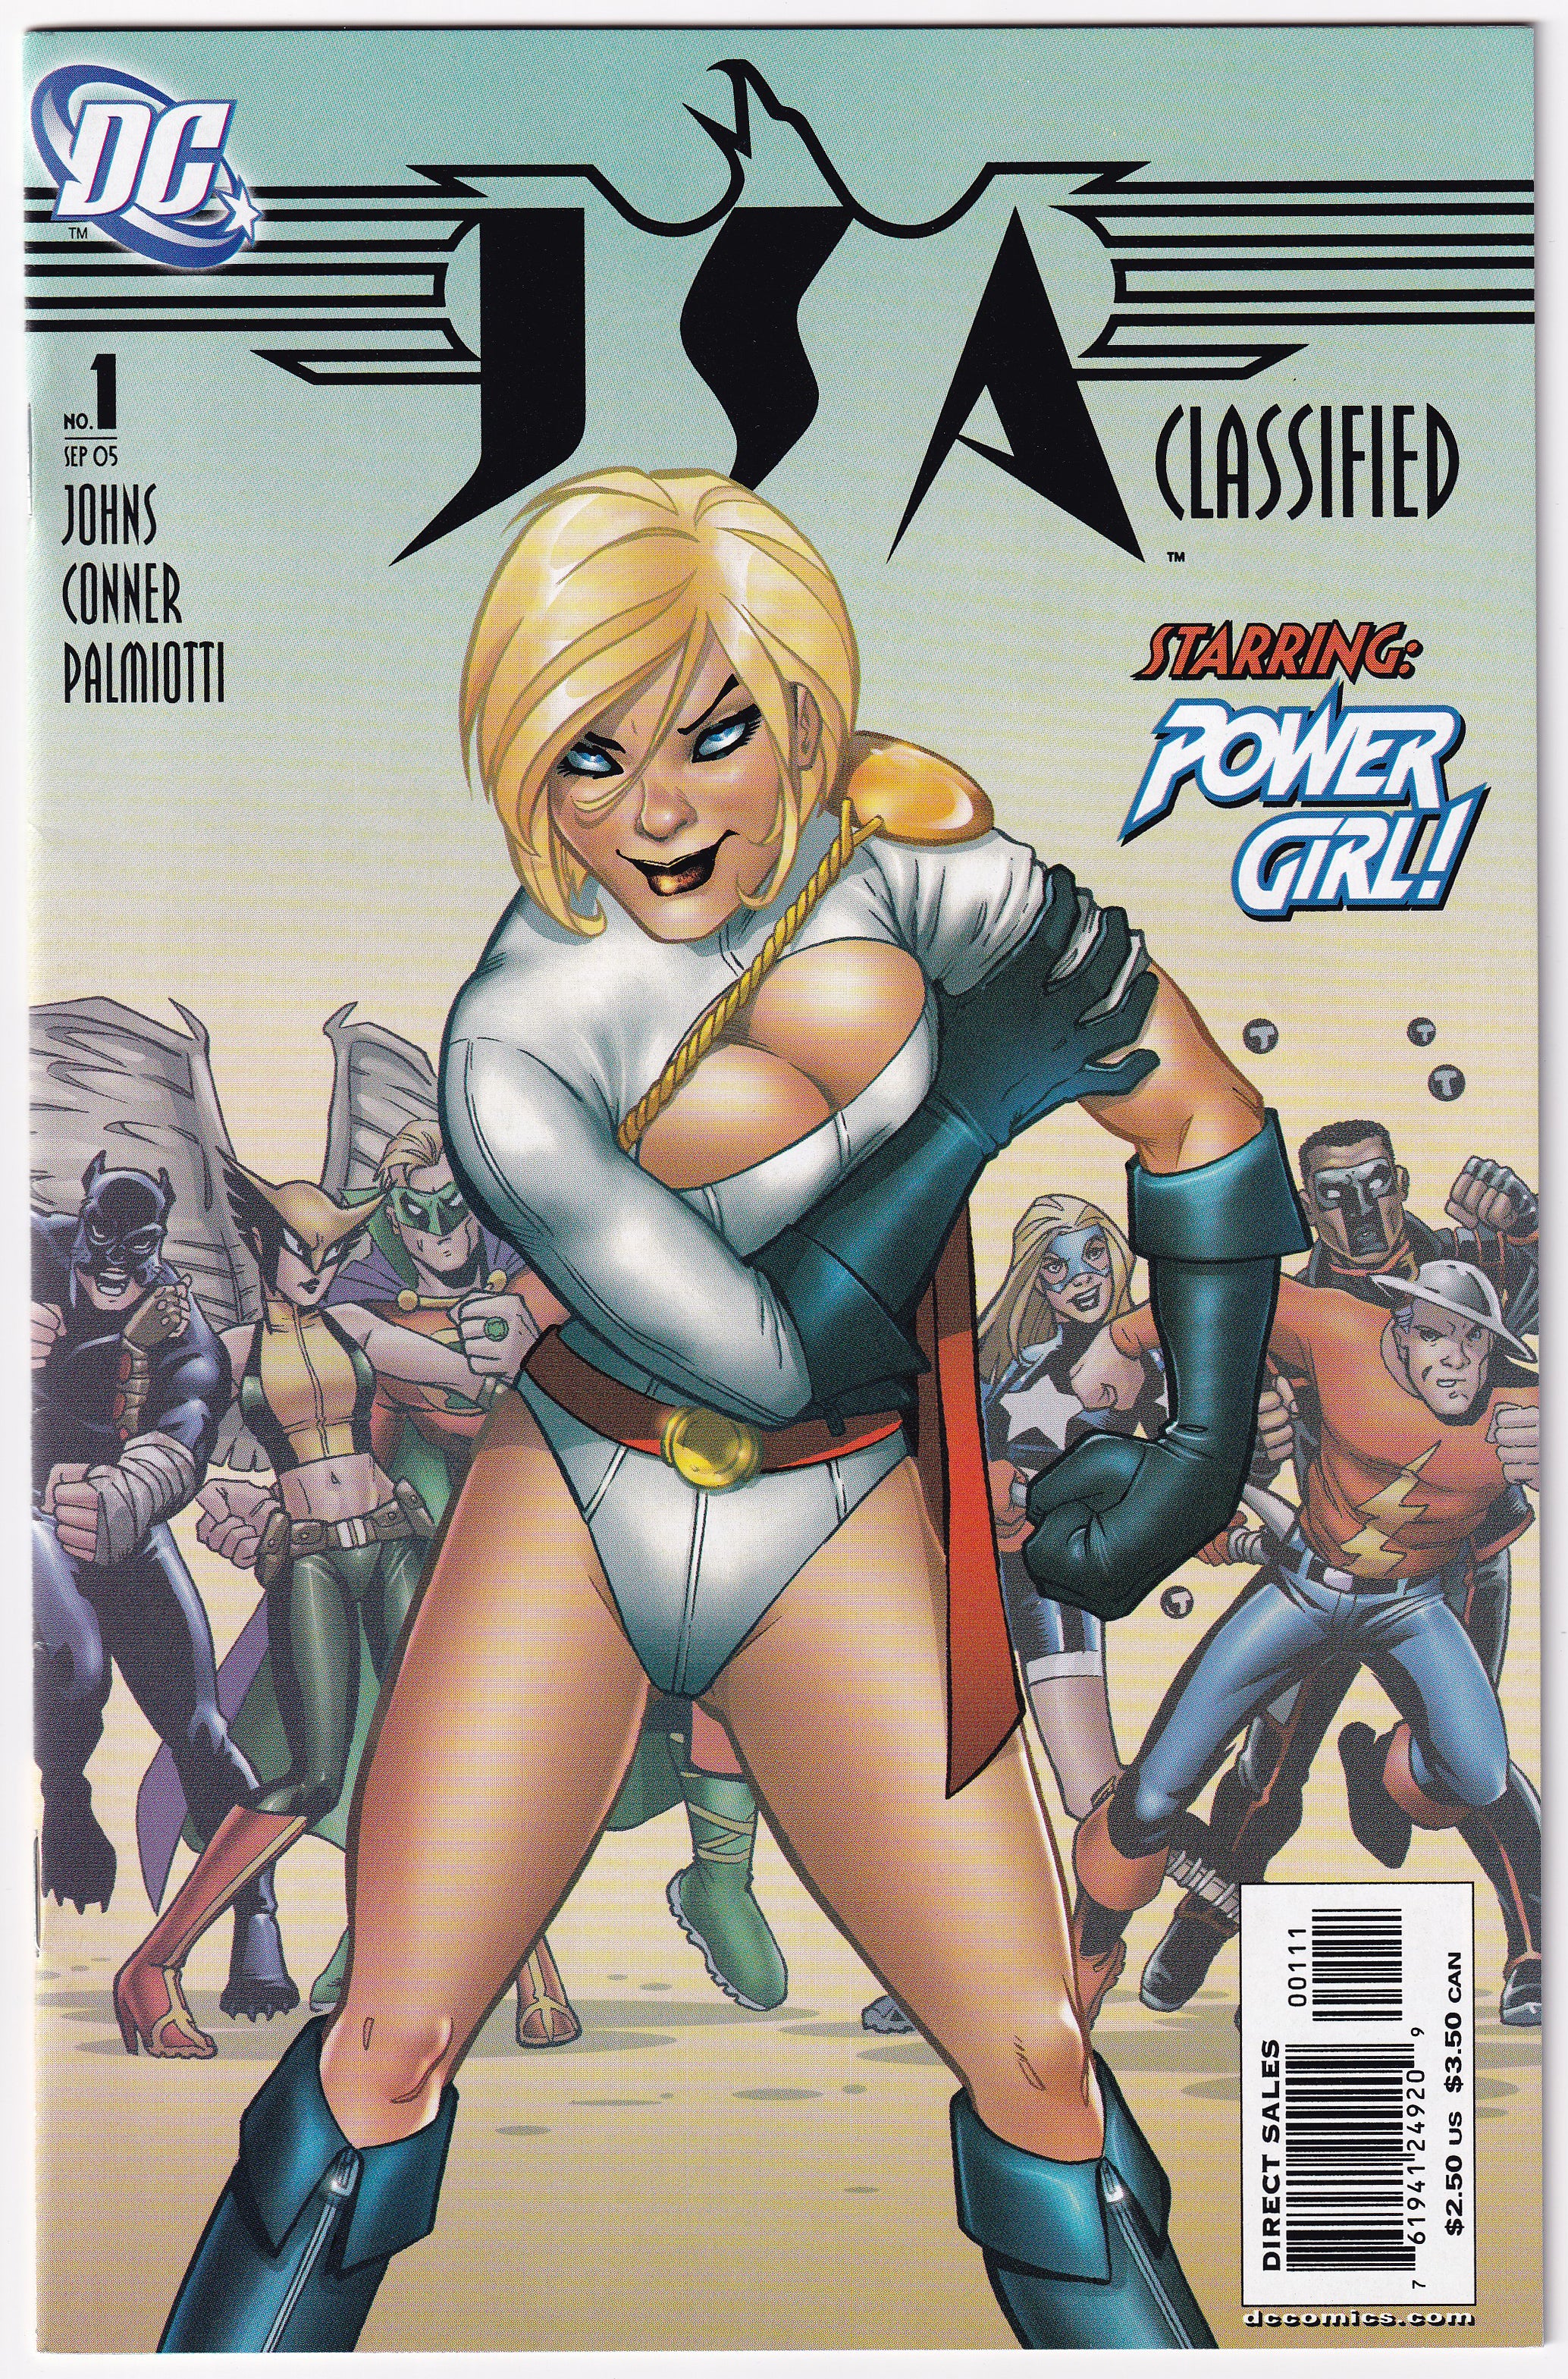 Photo of JSA Classified  (2005)  Issue 1A  Very Fine/Near Mint Comic sold by Stronghold Collectibles